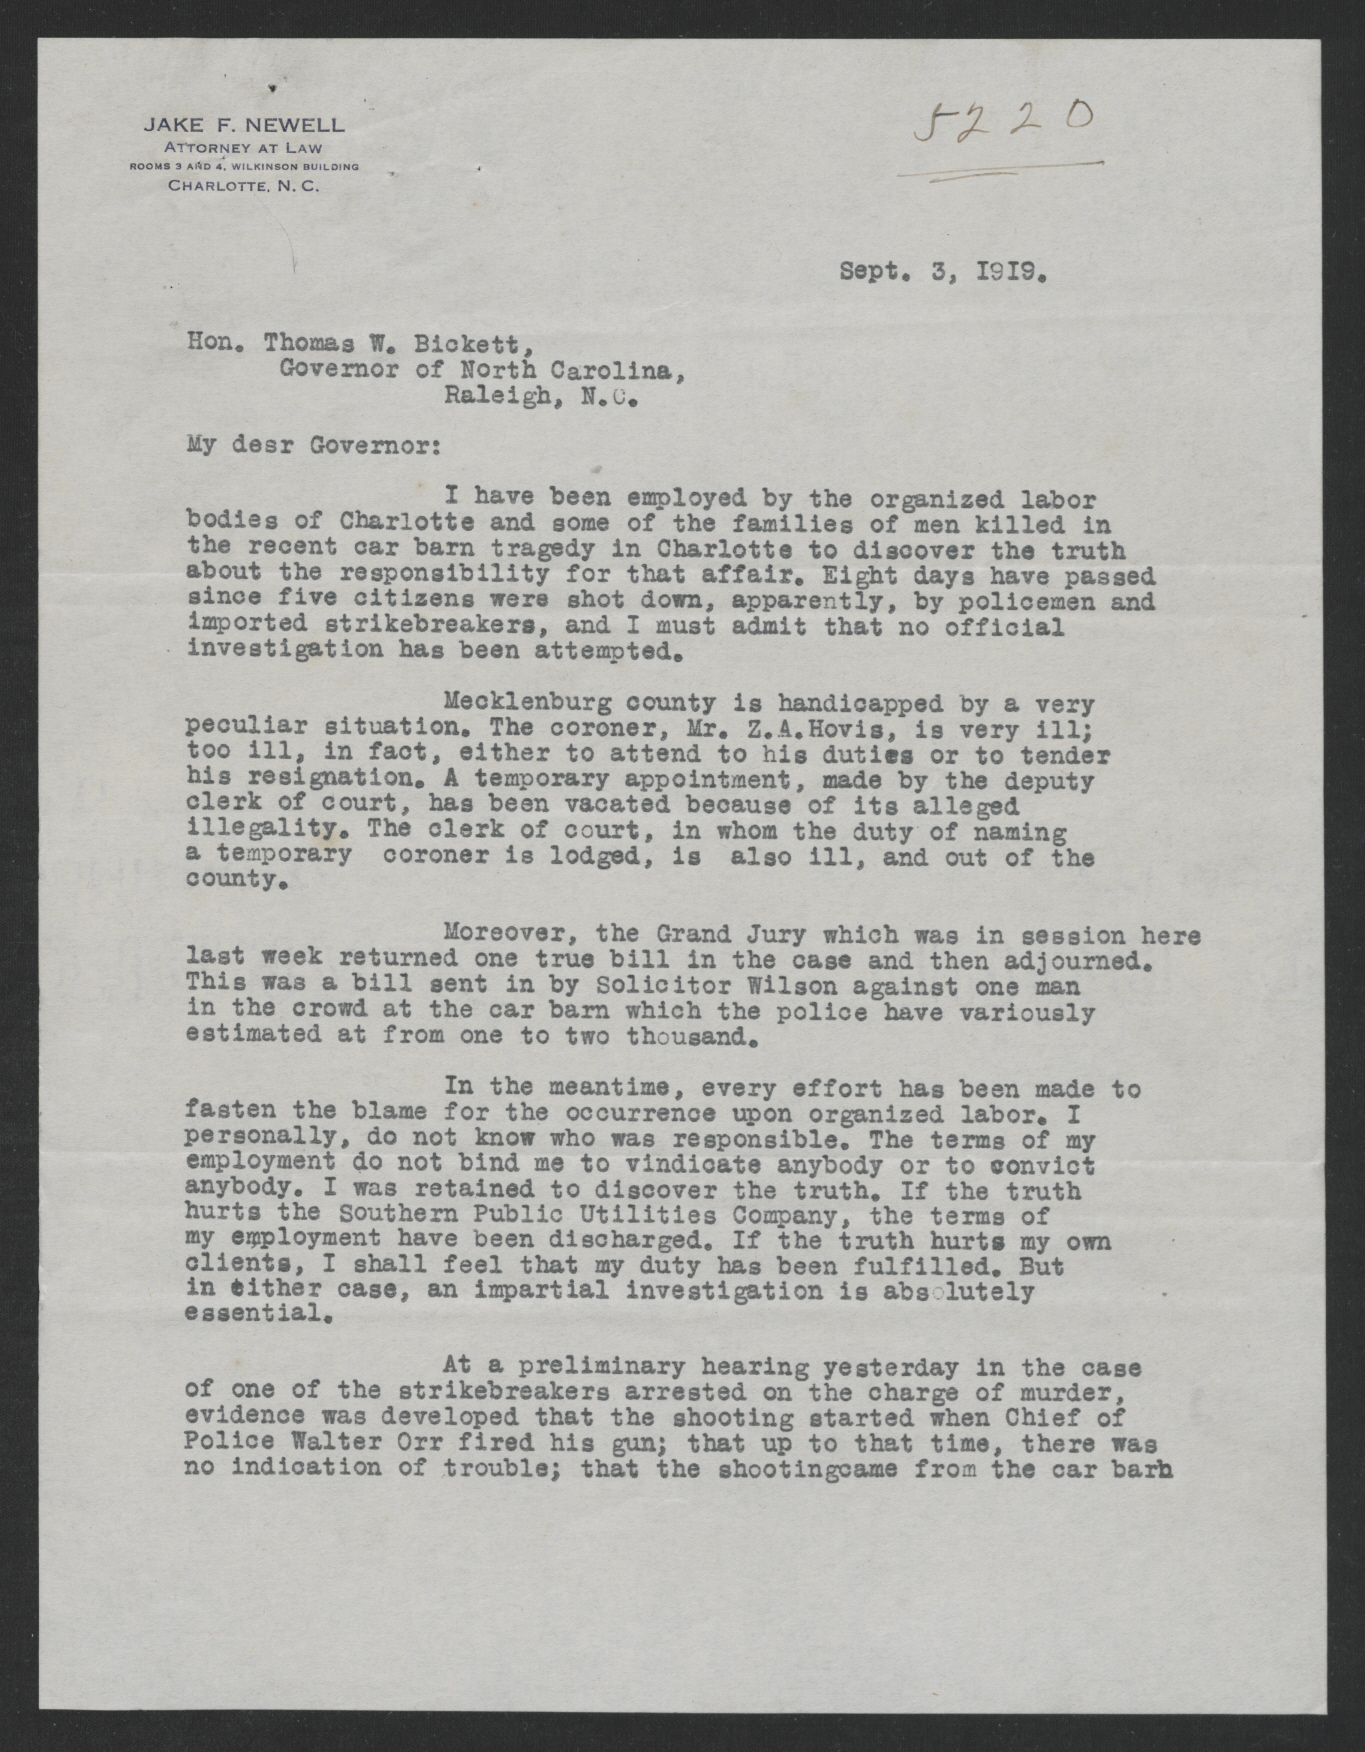 Letter from Jake F. Newell to Thomas W. Bickett, September 3, 1919, page 1